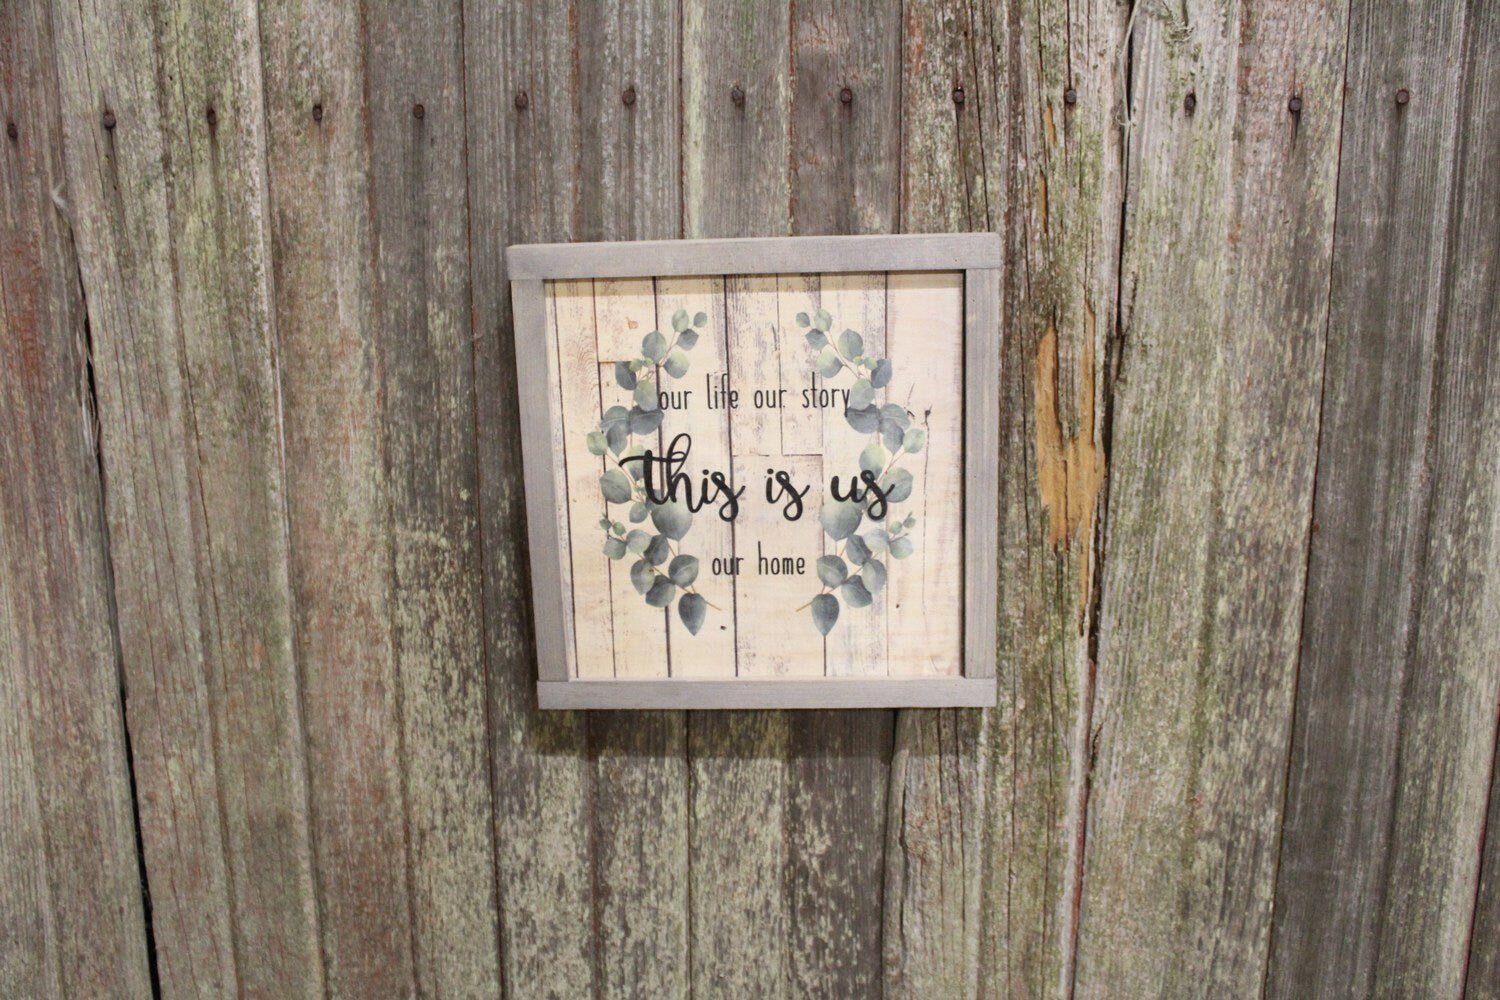 Framed This is Us Wood Sign Eucalyptus Wreath Our Life Our Story Our Home Rustic Text Decoration Print Farmhouse Primitive Wall Art Barn